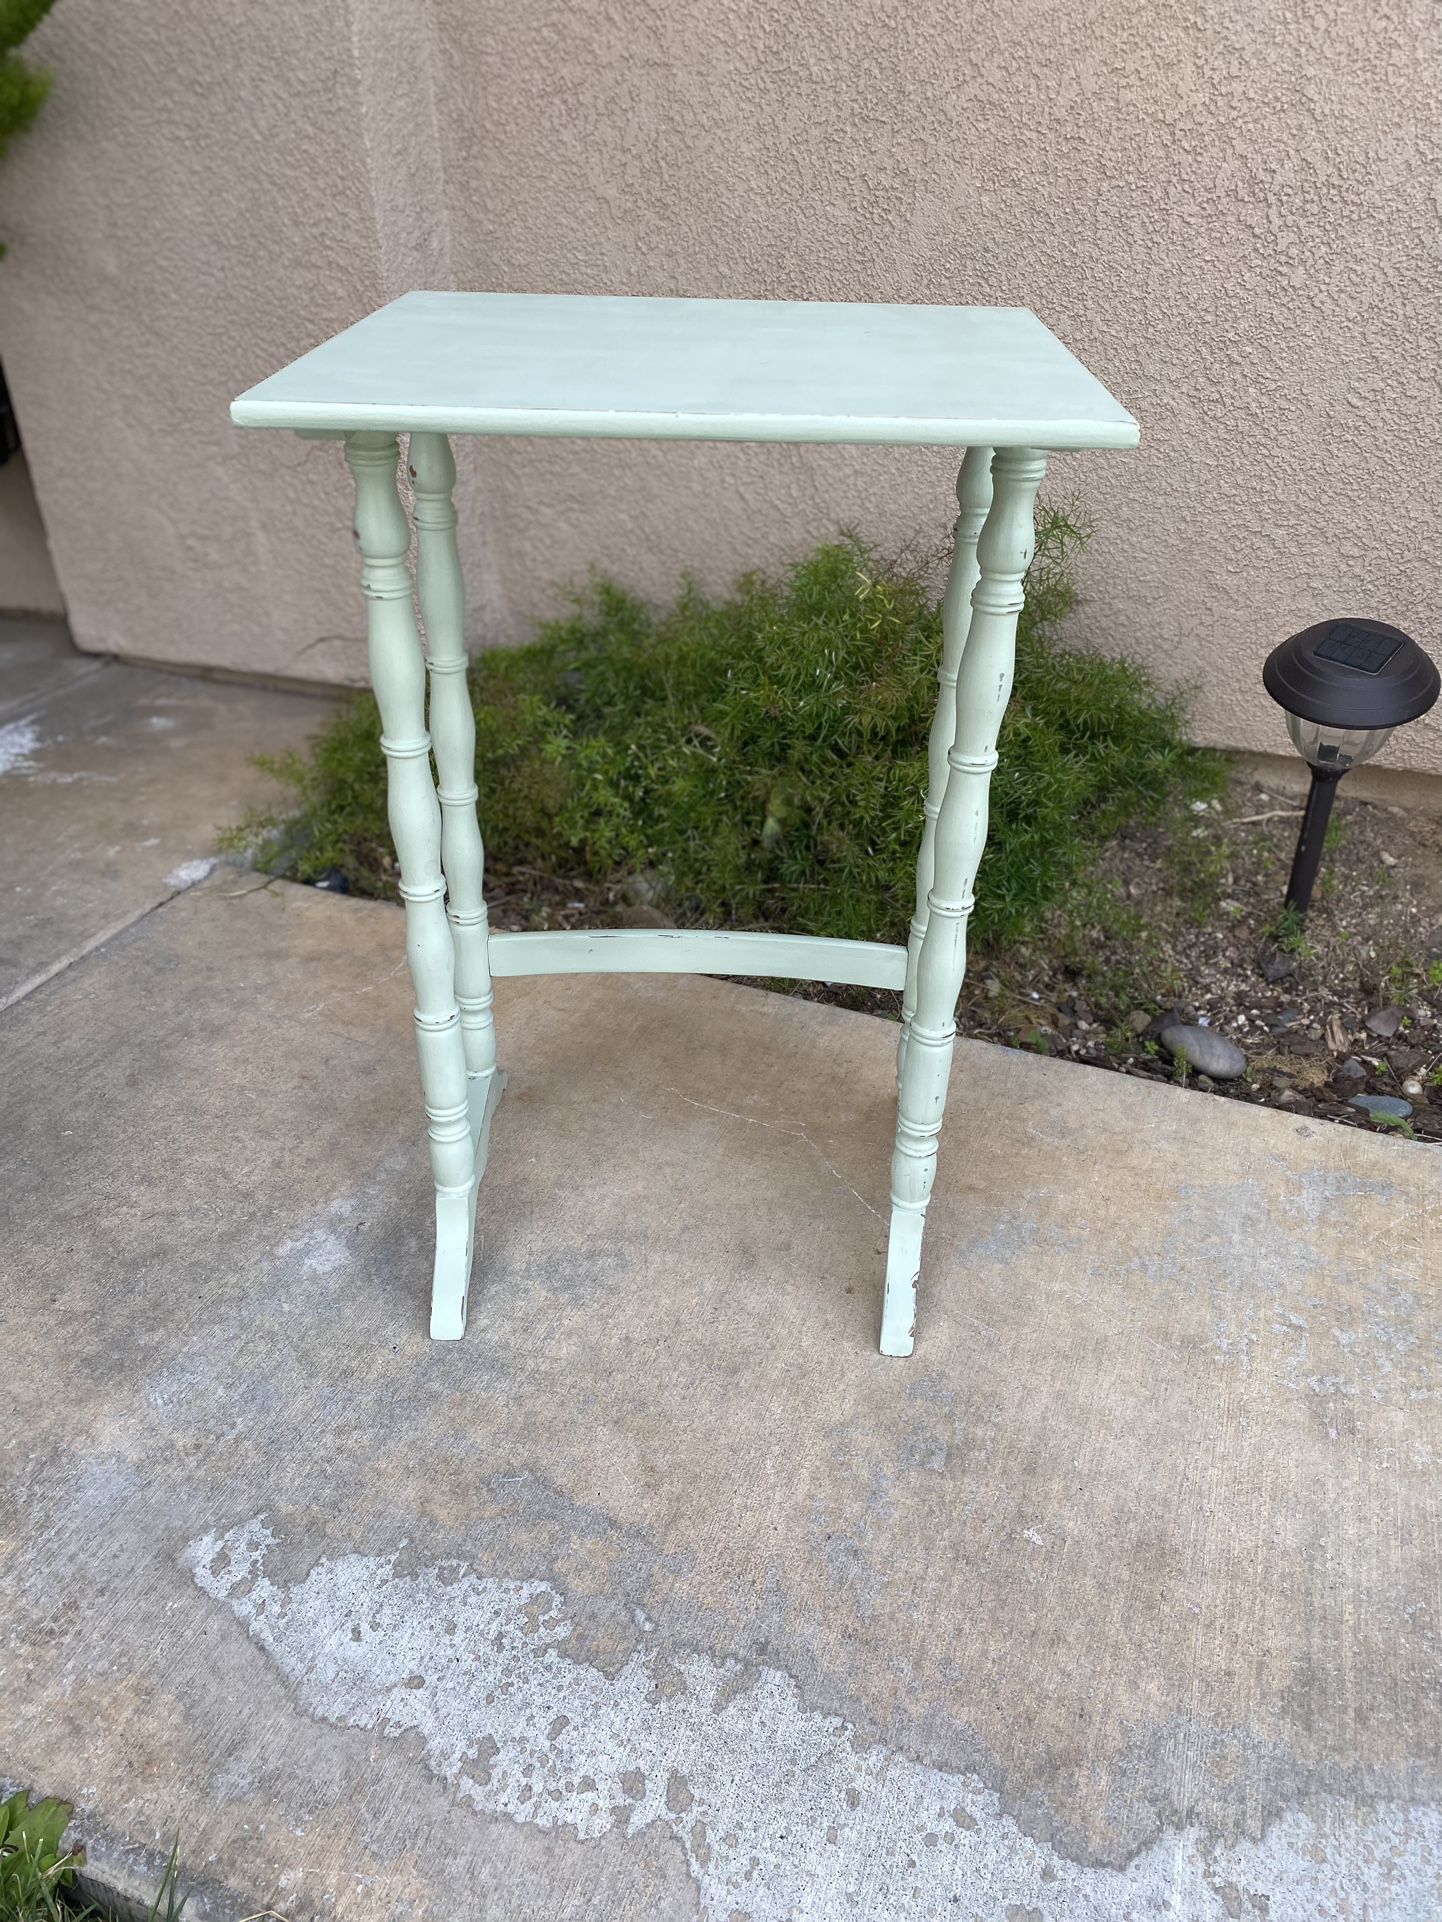 Selling one small accent table